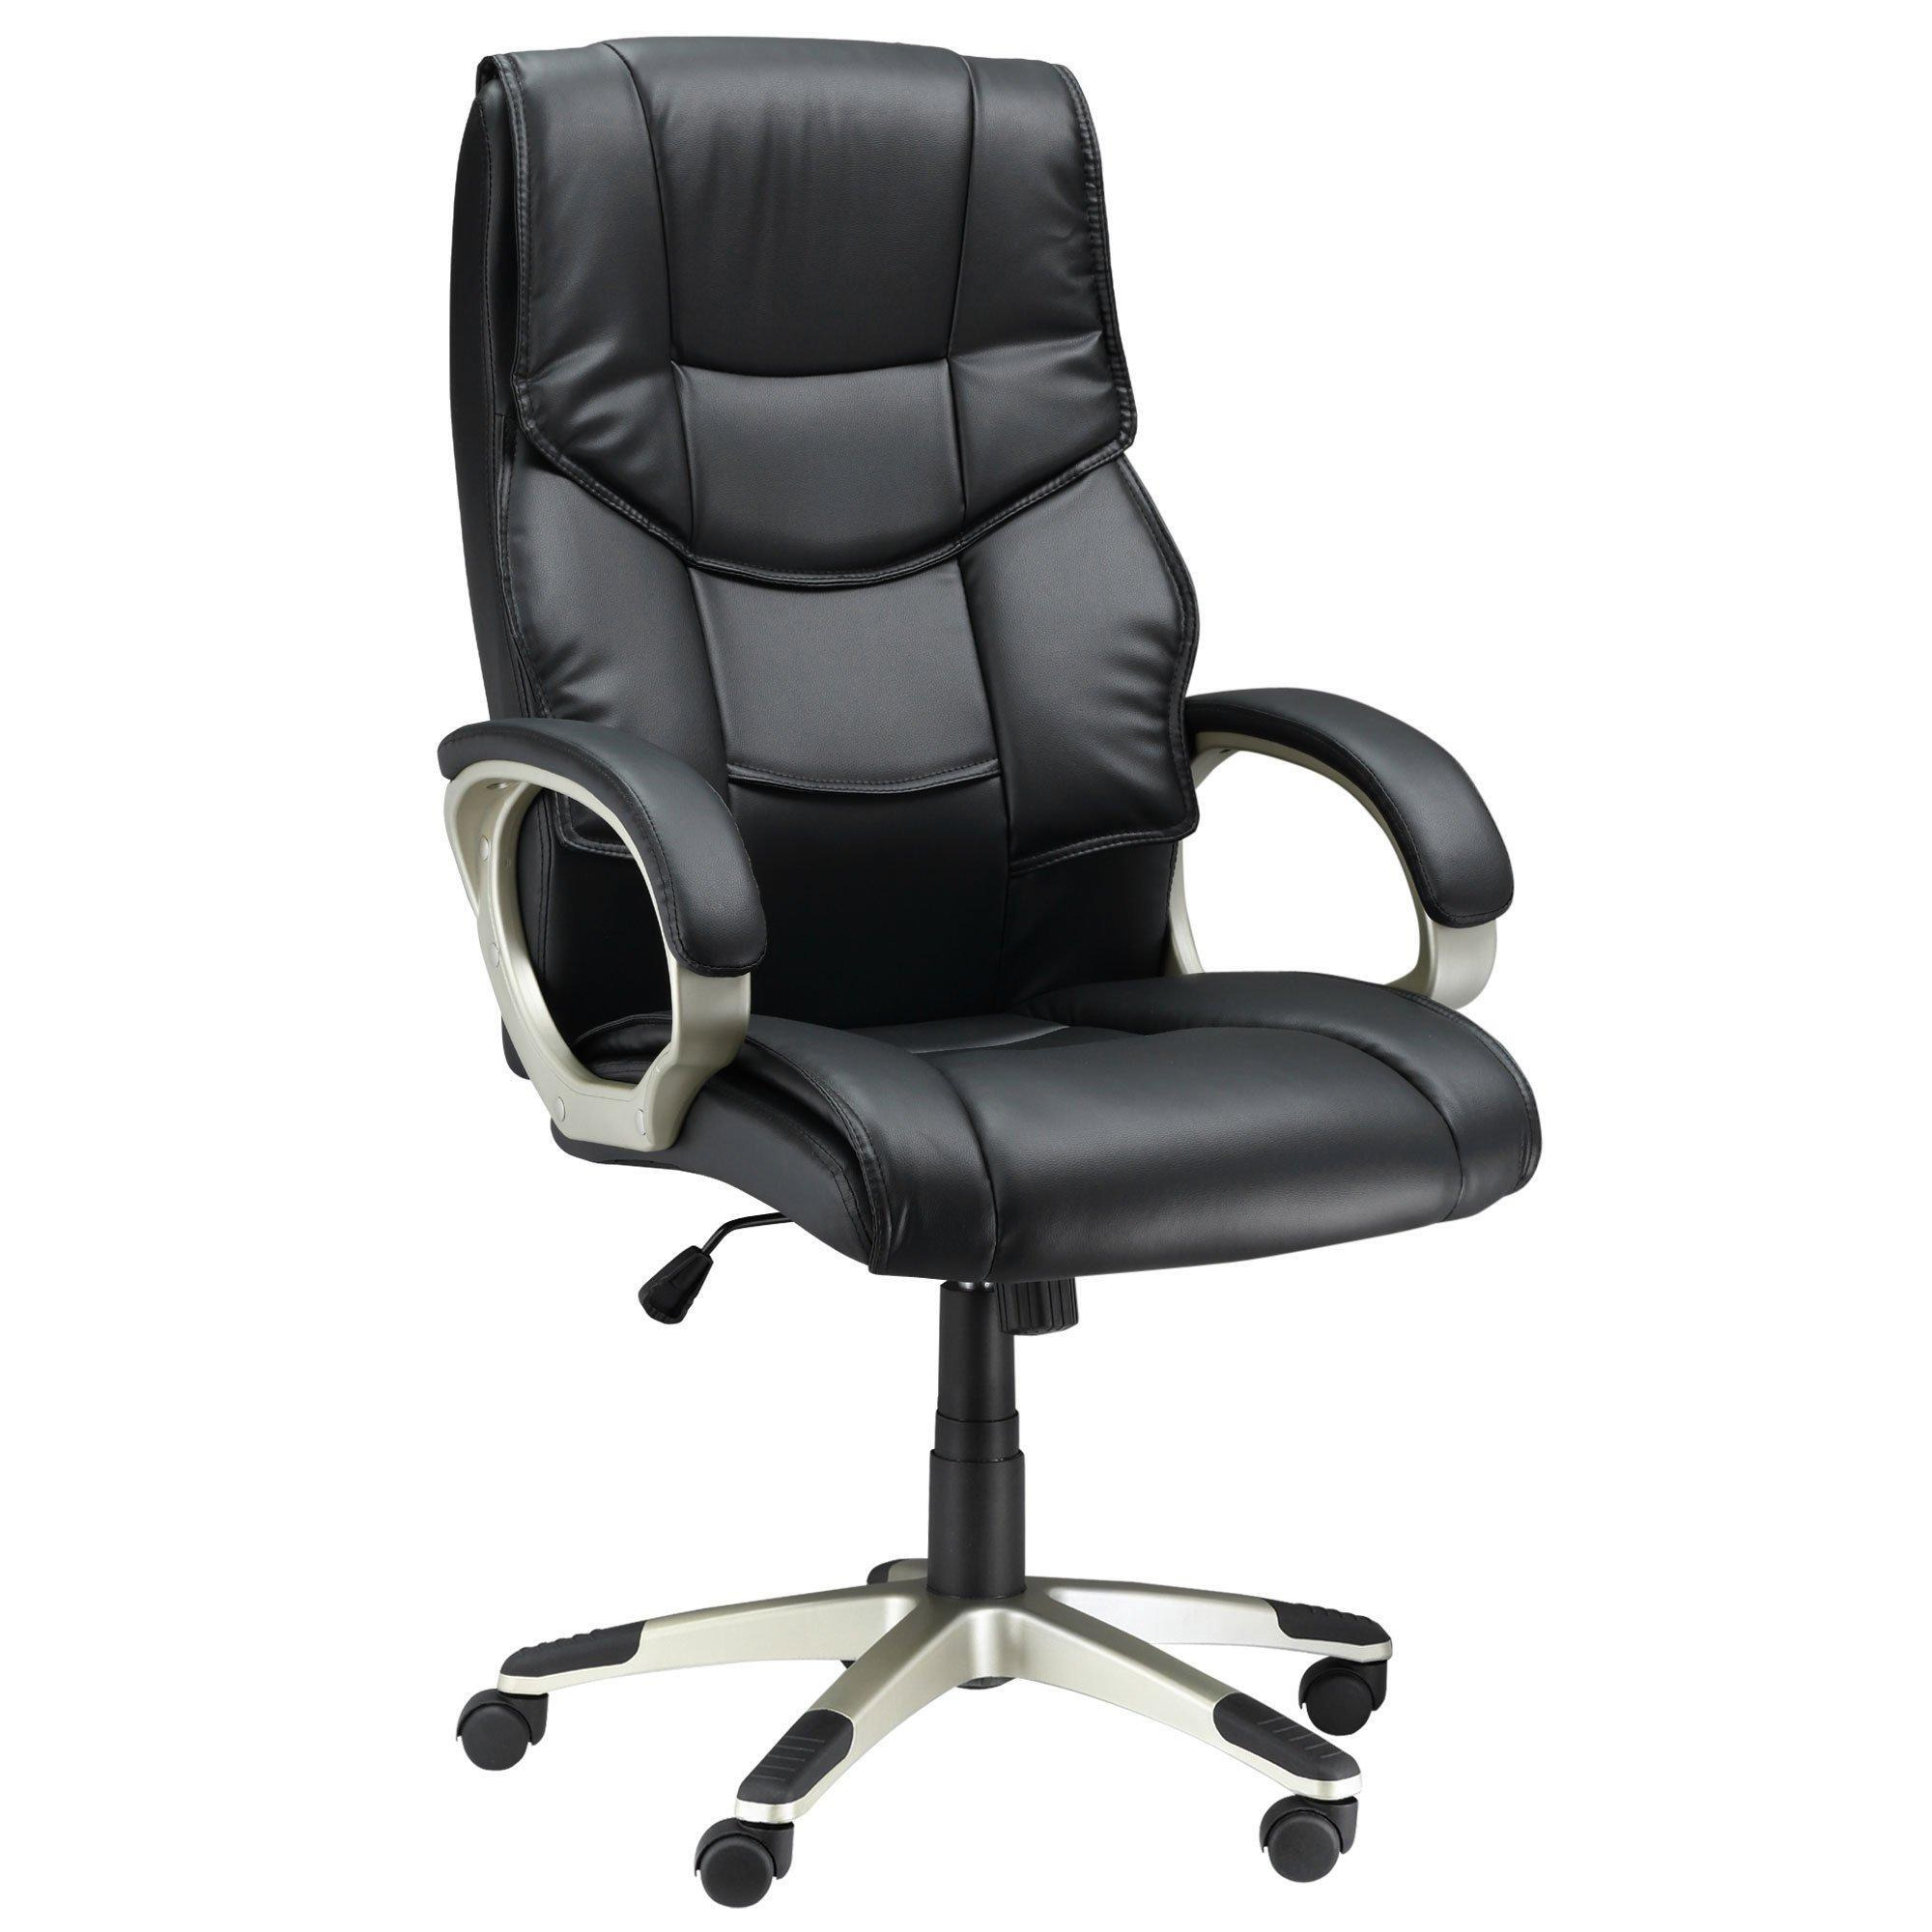 Executive Computer Office Desk Chair High Back Faux Leather - image 1